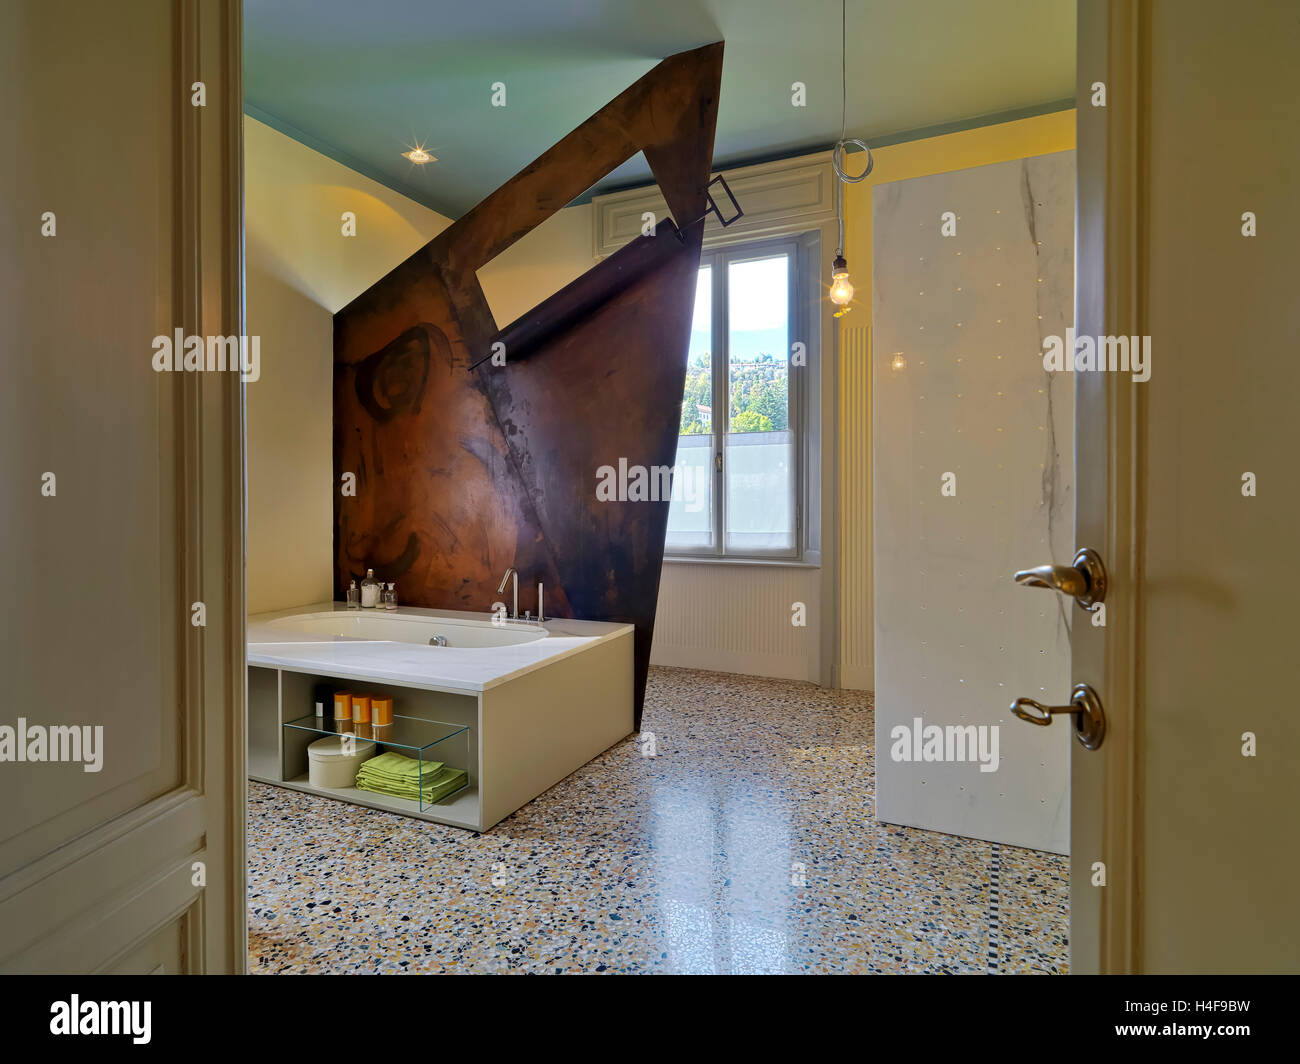 interior view of a modern bathroom with bathtub and marble floor Stock Photo